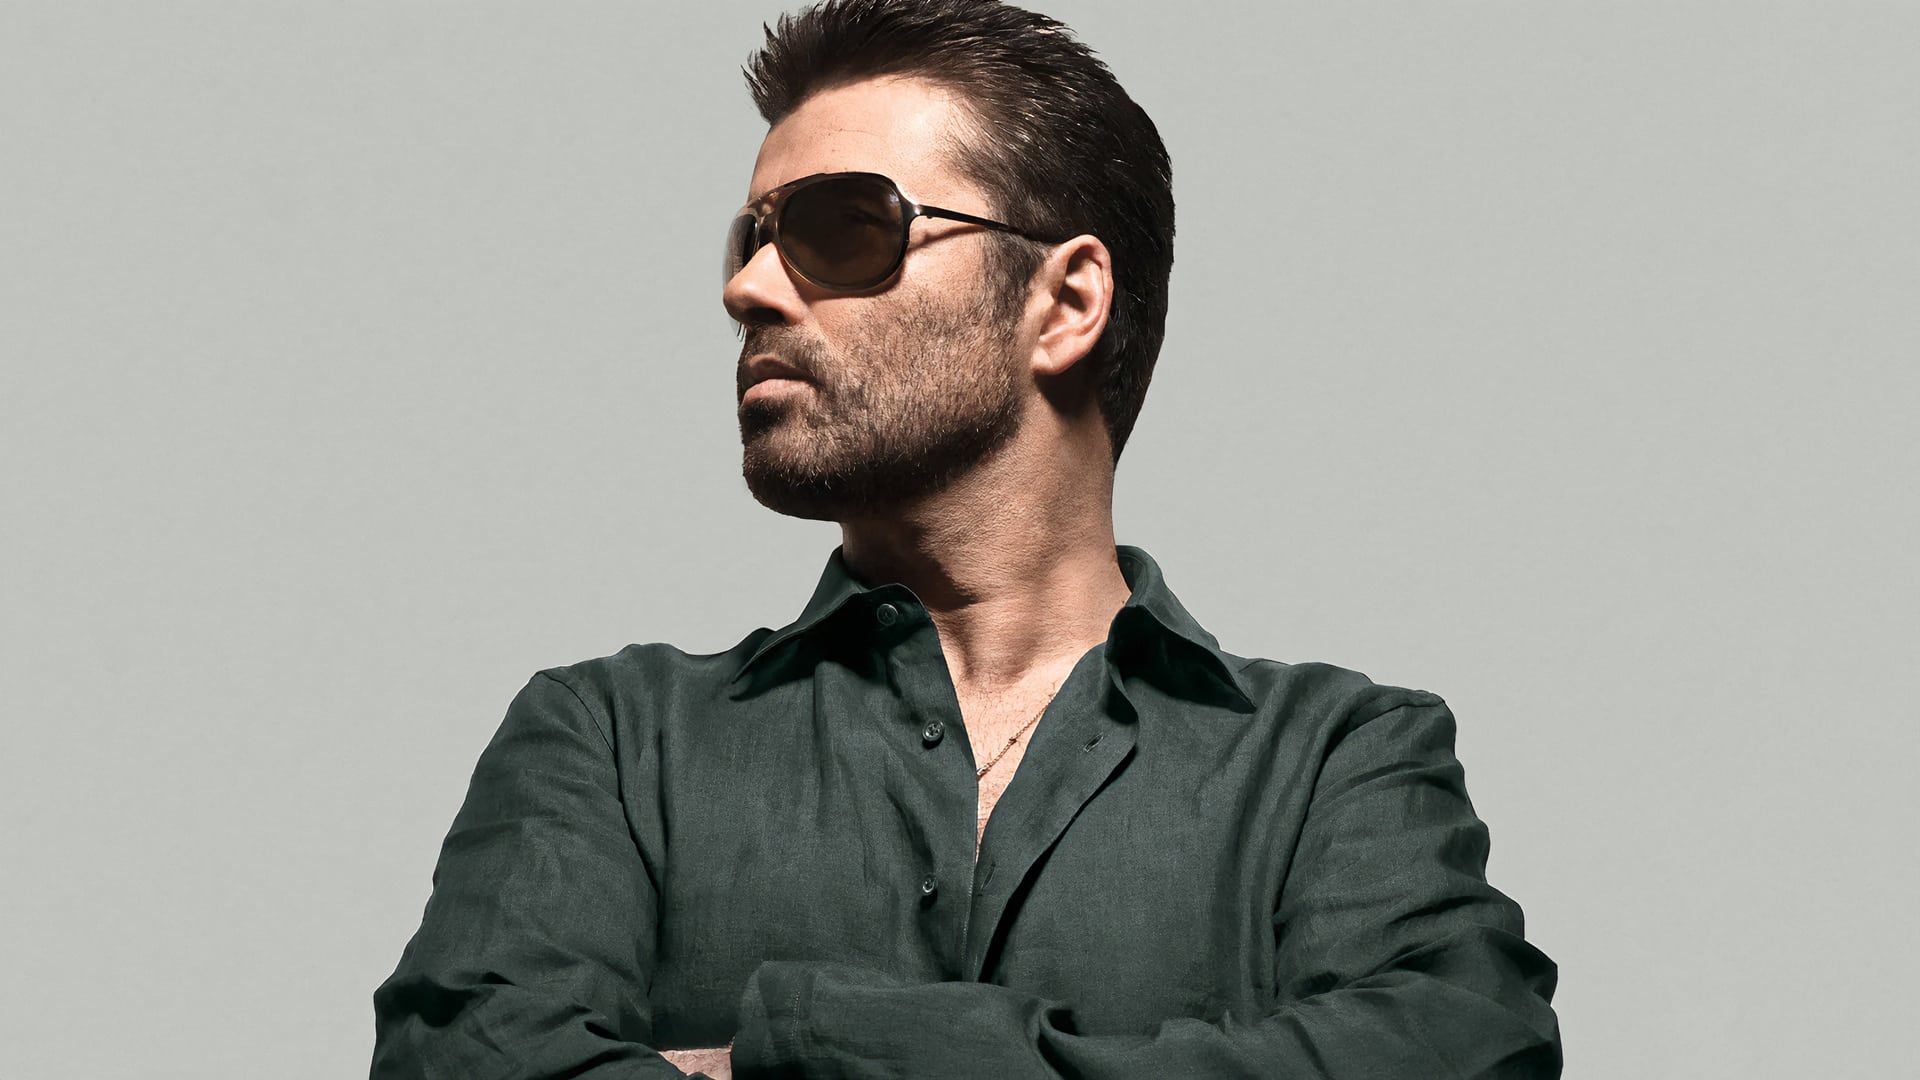 George Michael: A Different Story background